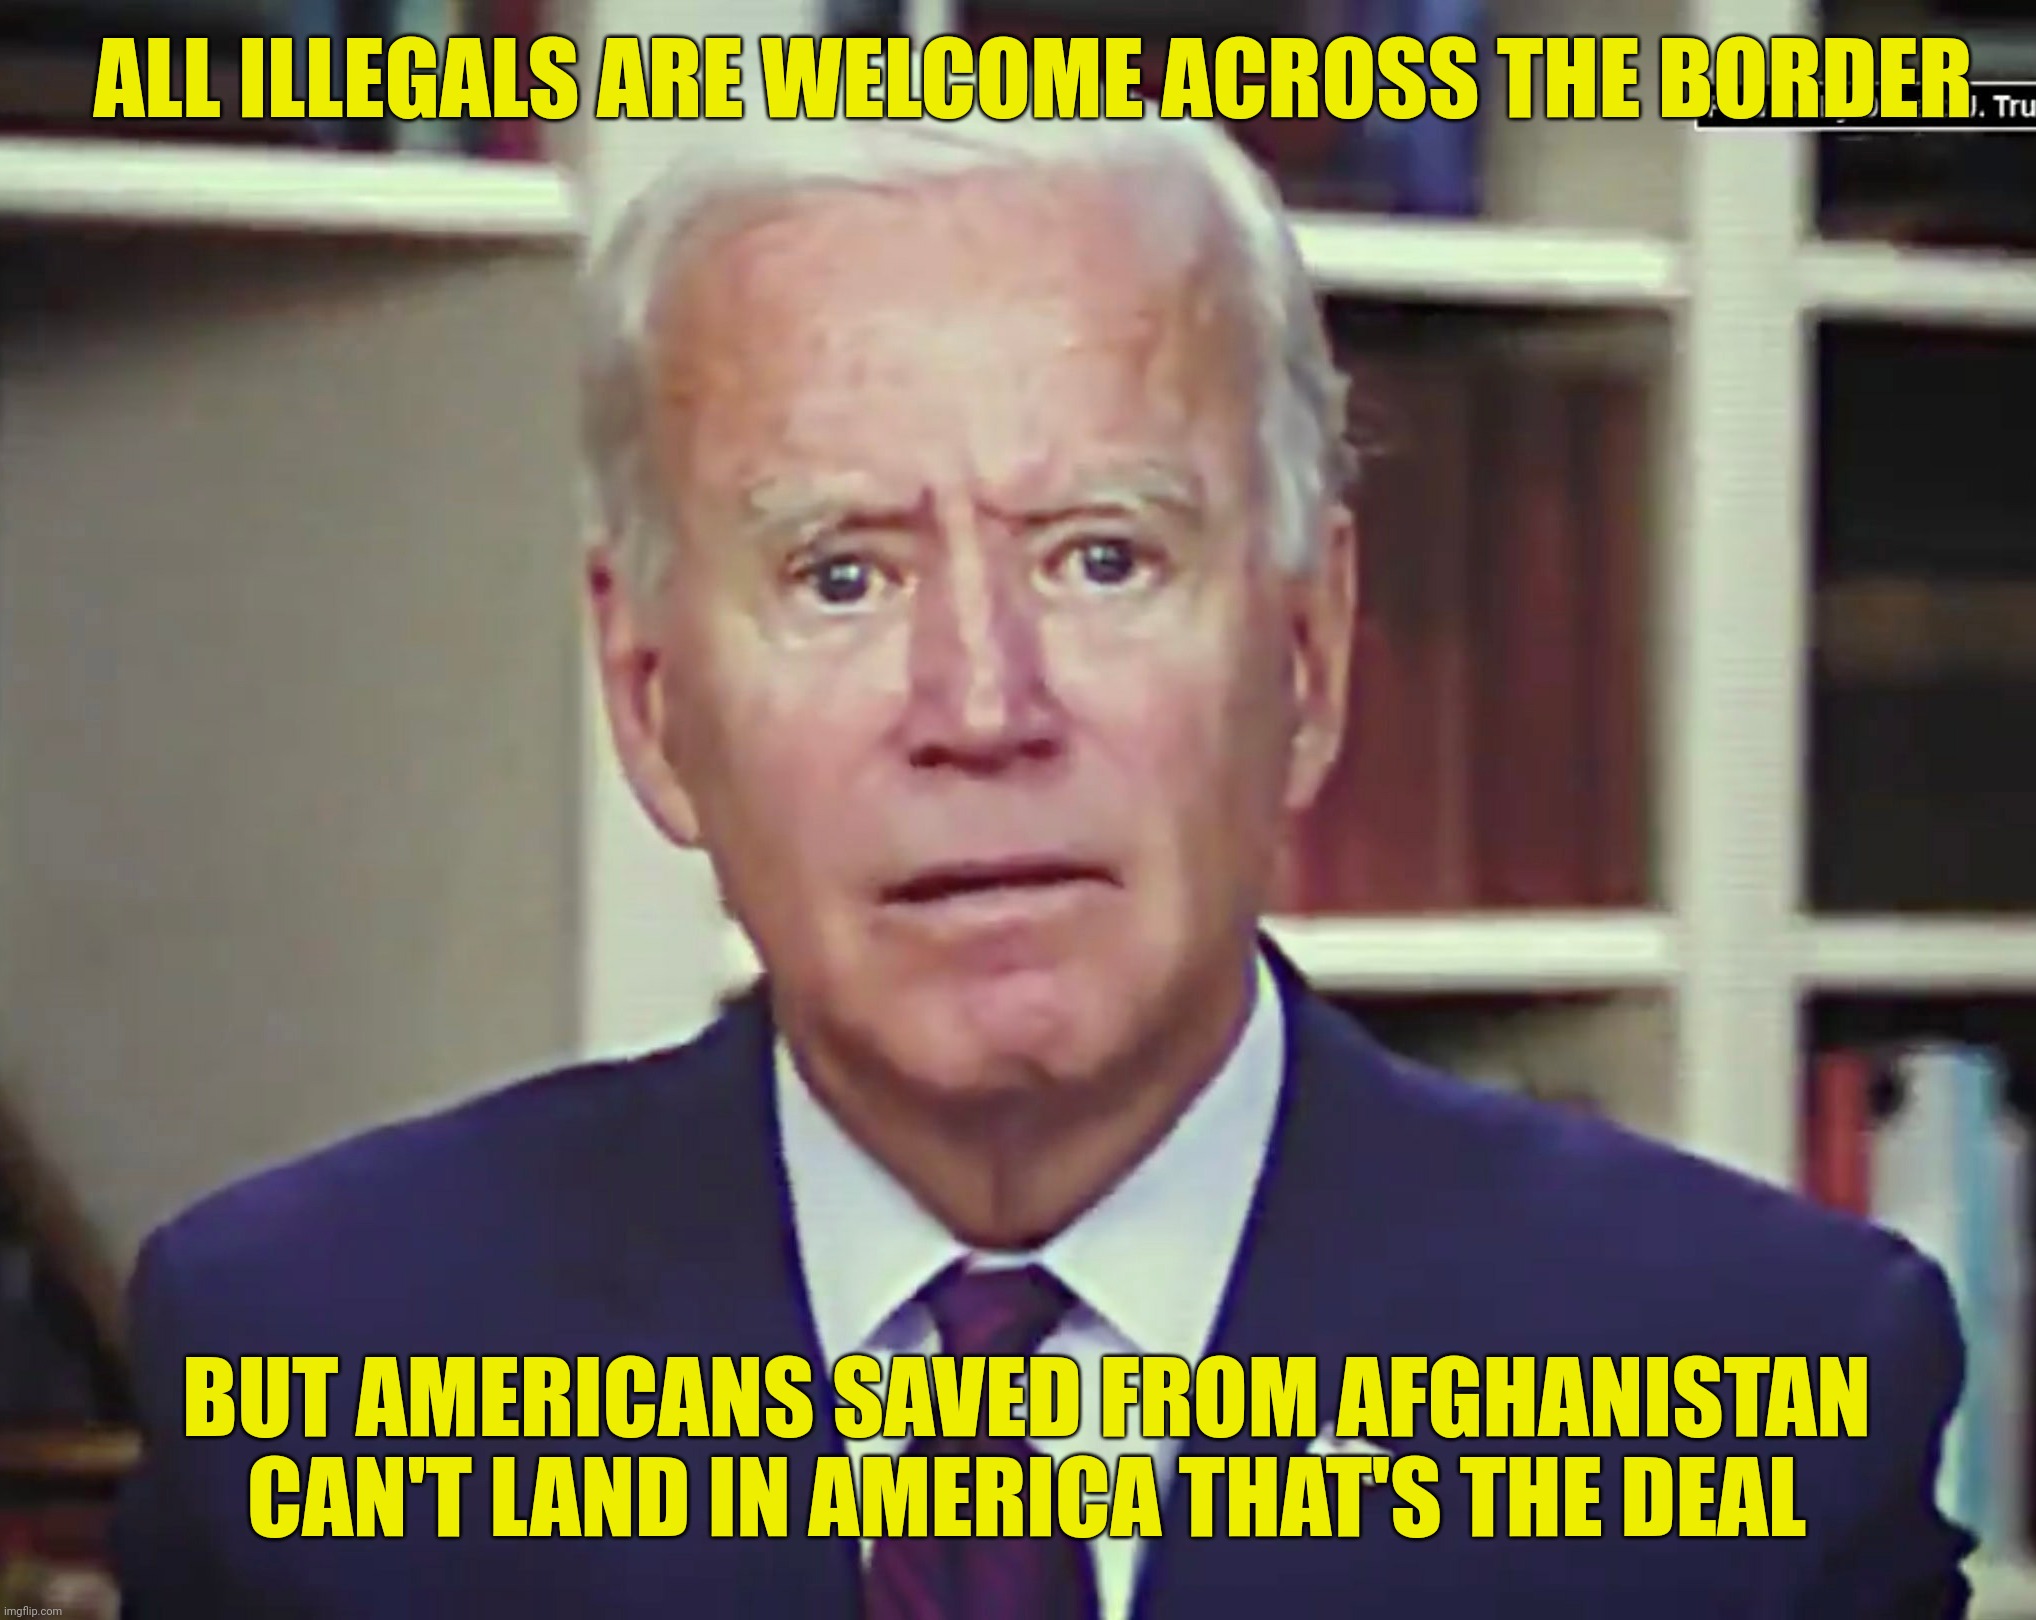 ALL ILLEGALS ARE WELCOME ACROSS THE BORDER BUT AMERICANS SAVED FROM AFGHANISTAN CAN'T LAND IN AMERICA THAT'S THE DEAL | made w/ Imgflip meme maker